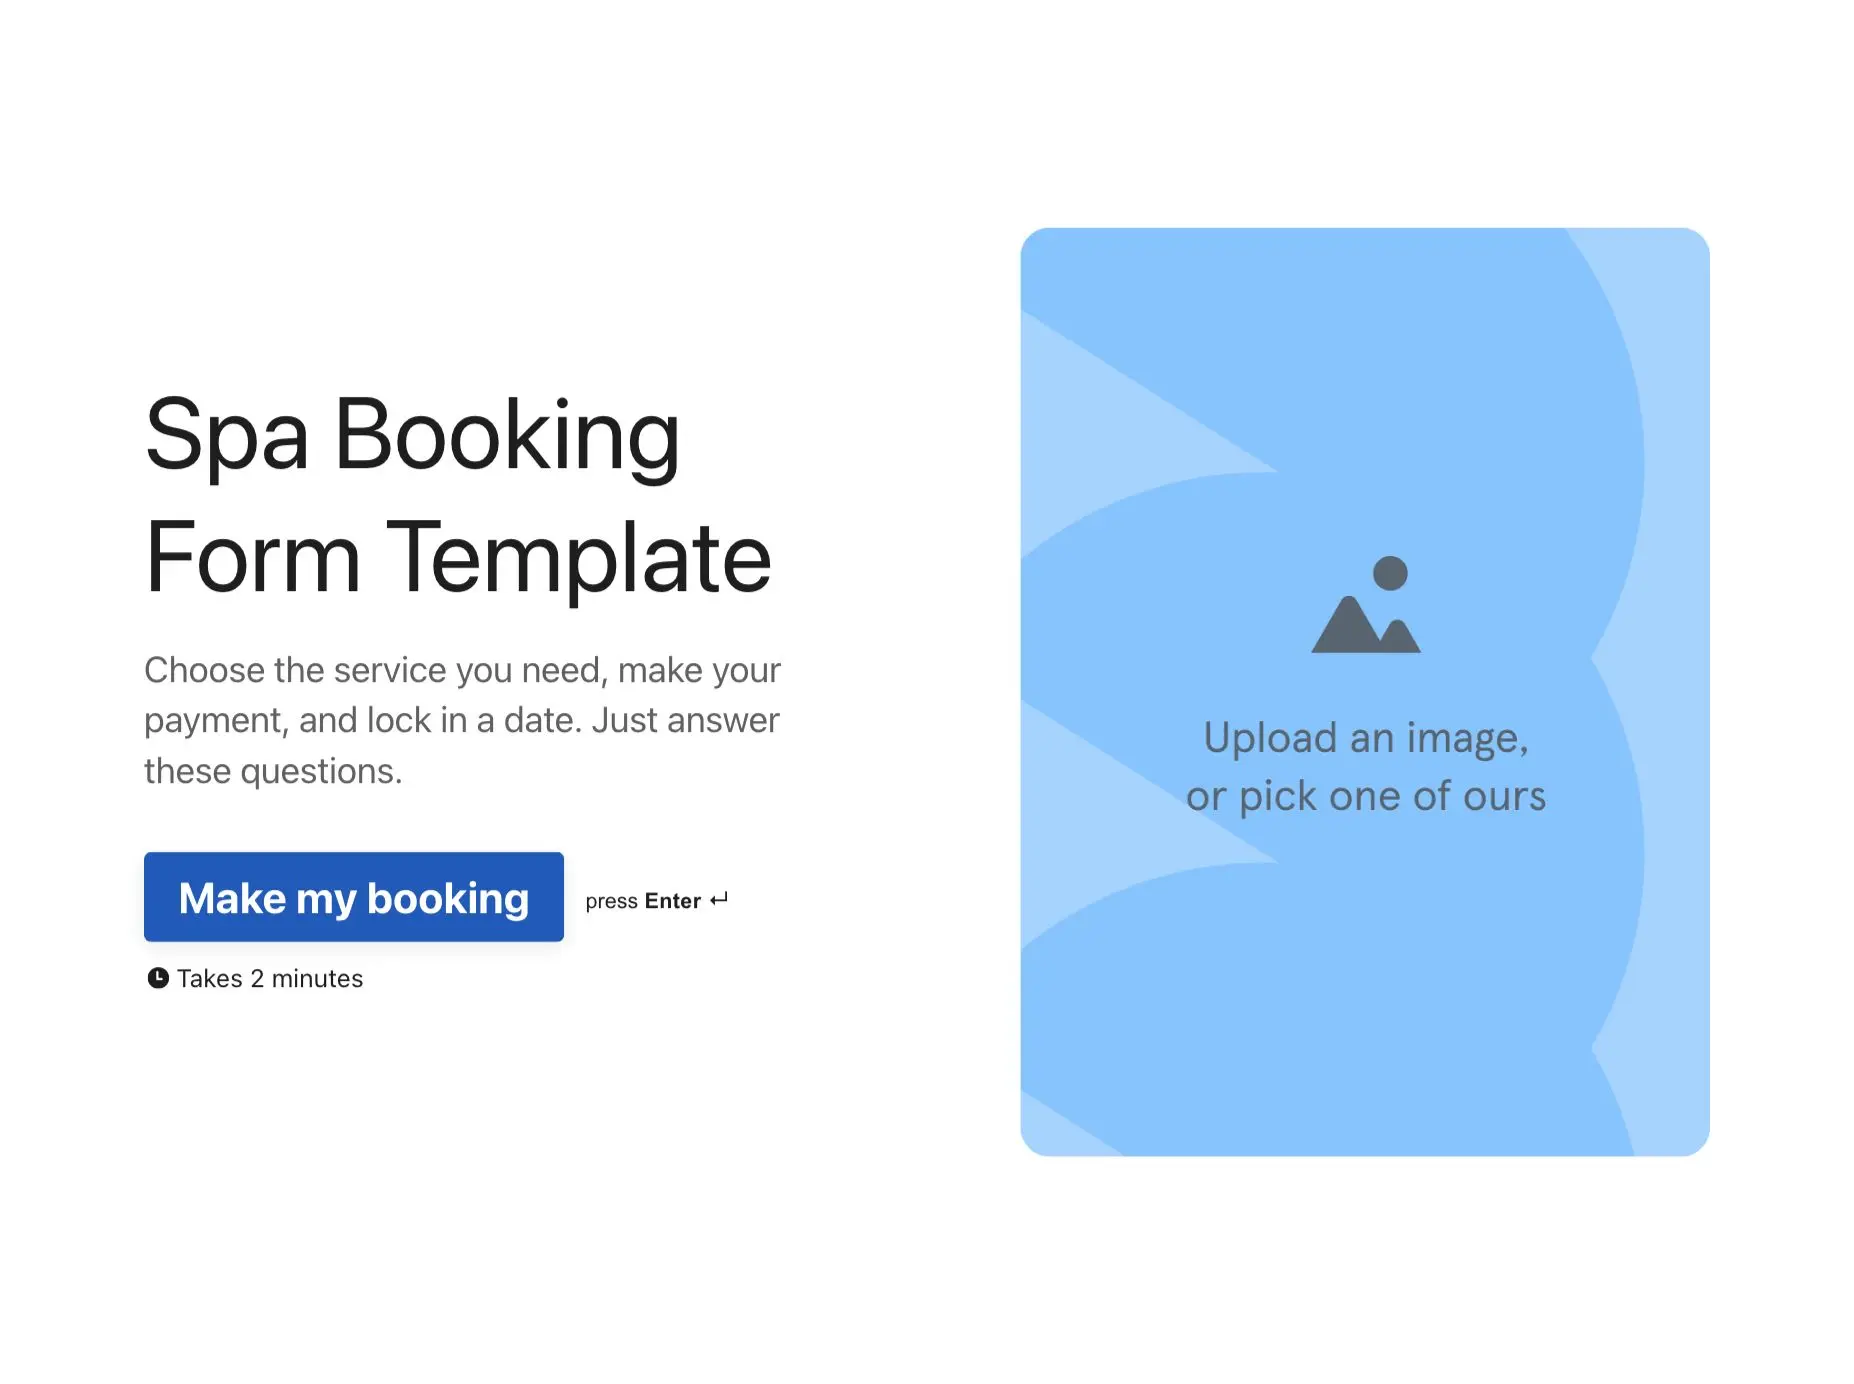 Spa Booking Form Template Hero